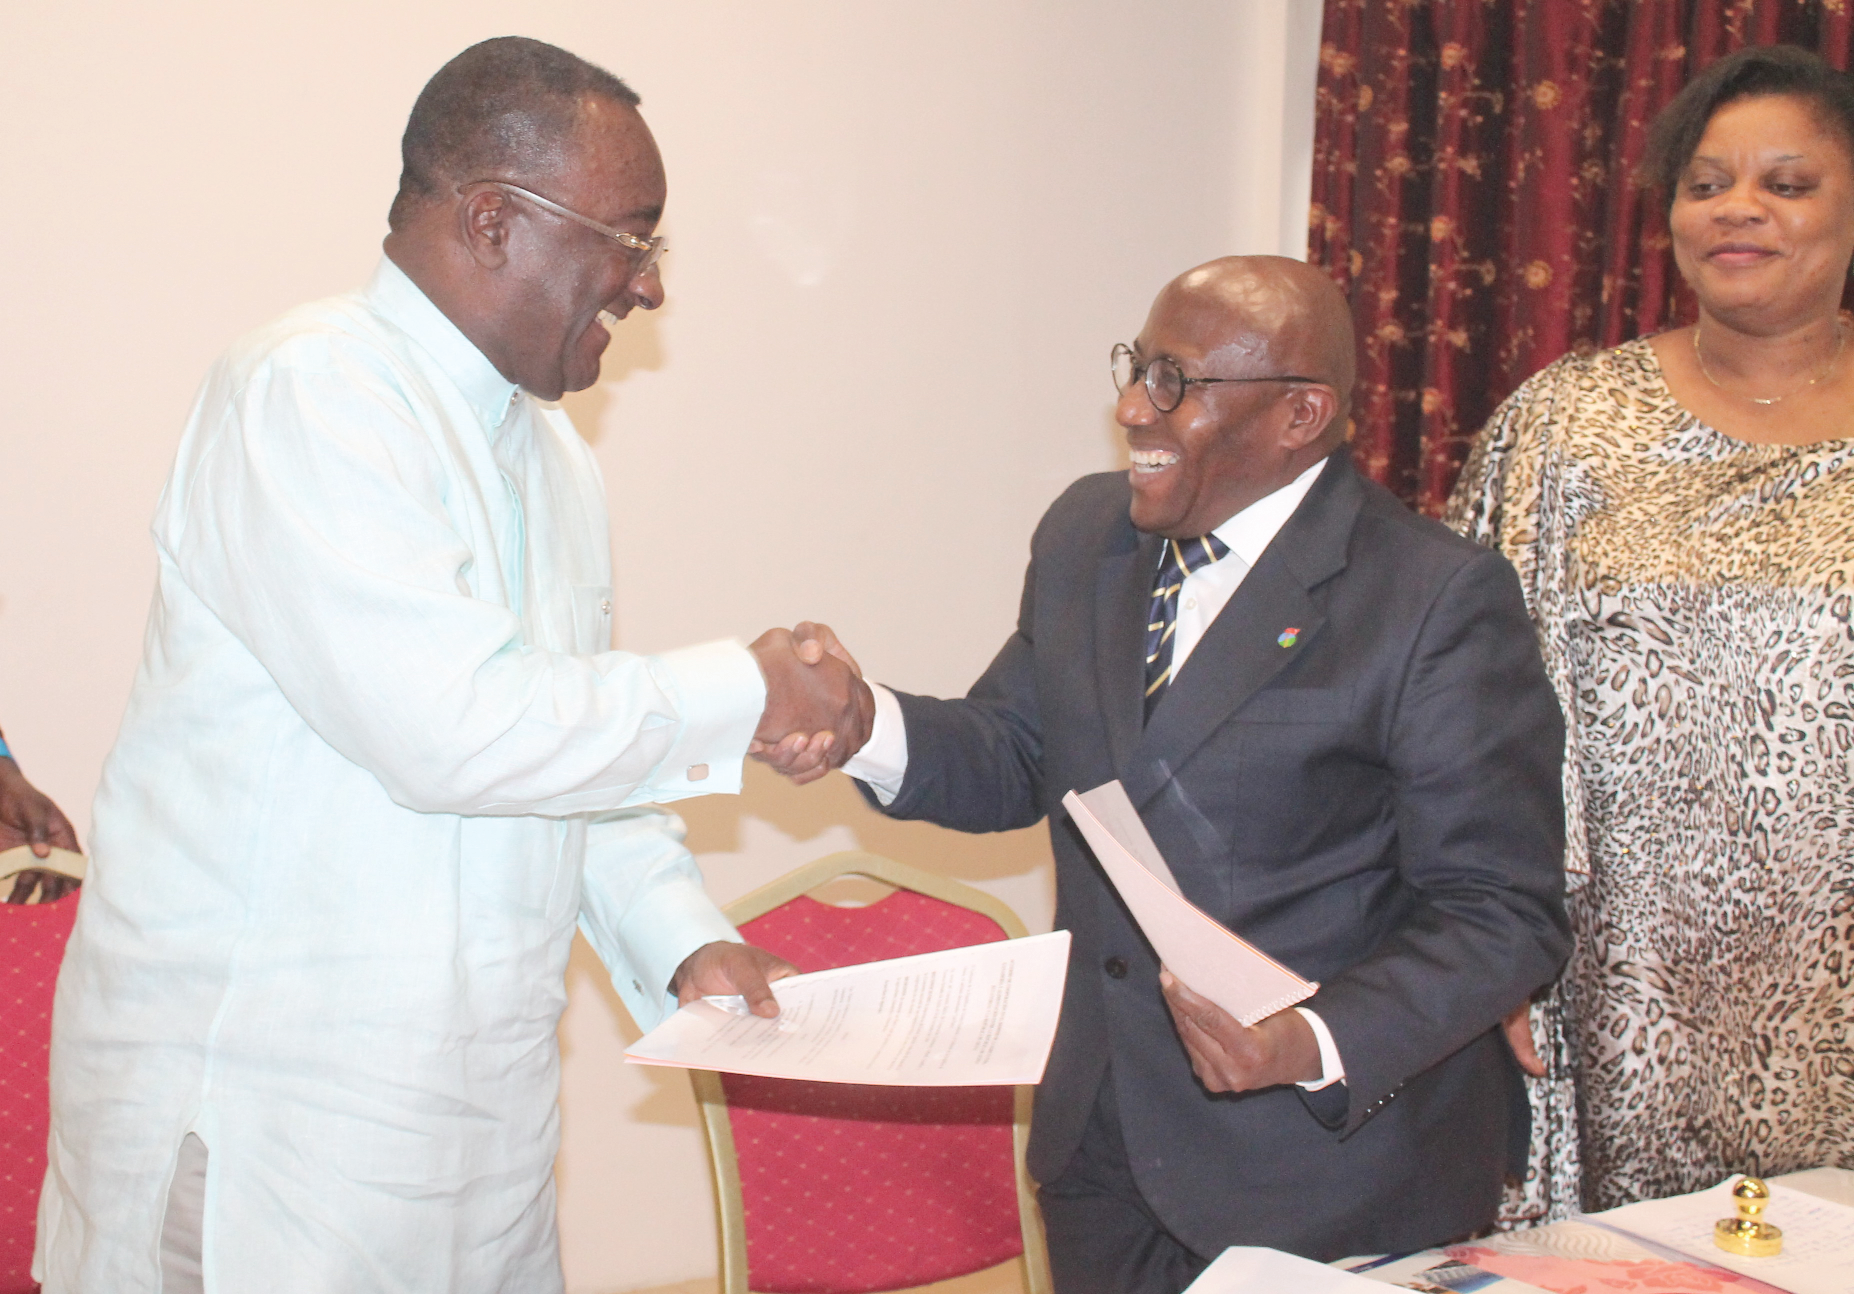 Dr Owusu Afriyie Akoto (left) and Mr Victor Grange Mehile (2nd left), Minister of Agriculture, Animal Husbandry and Food, Equatorial Guinea, exchanging the signed documents. Looking on is Mrs Maria Cristina Yehousessi Mikue (3rd left), Consular of Embassy of Equatorial Guinea in Ghana